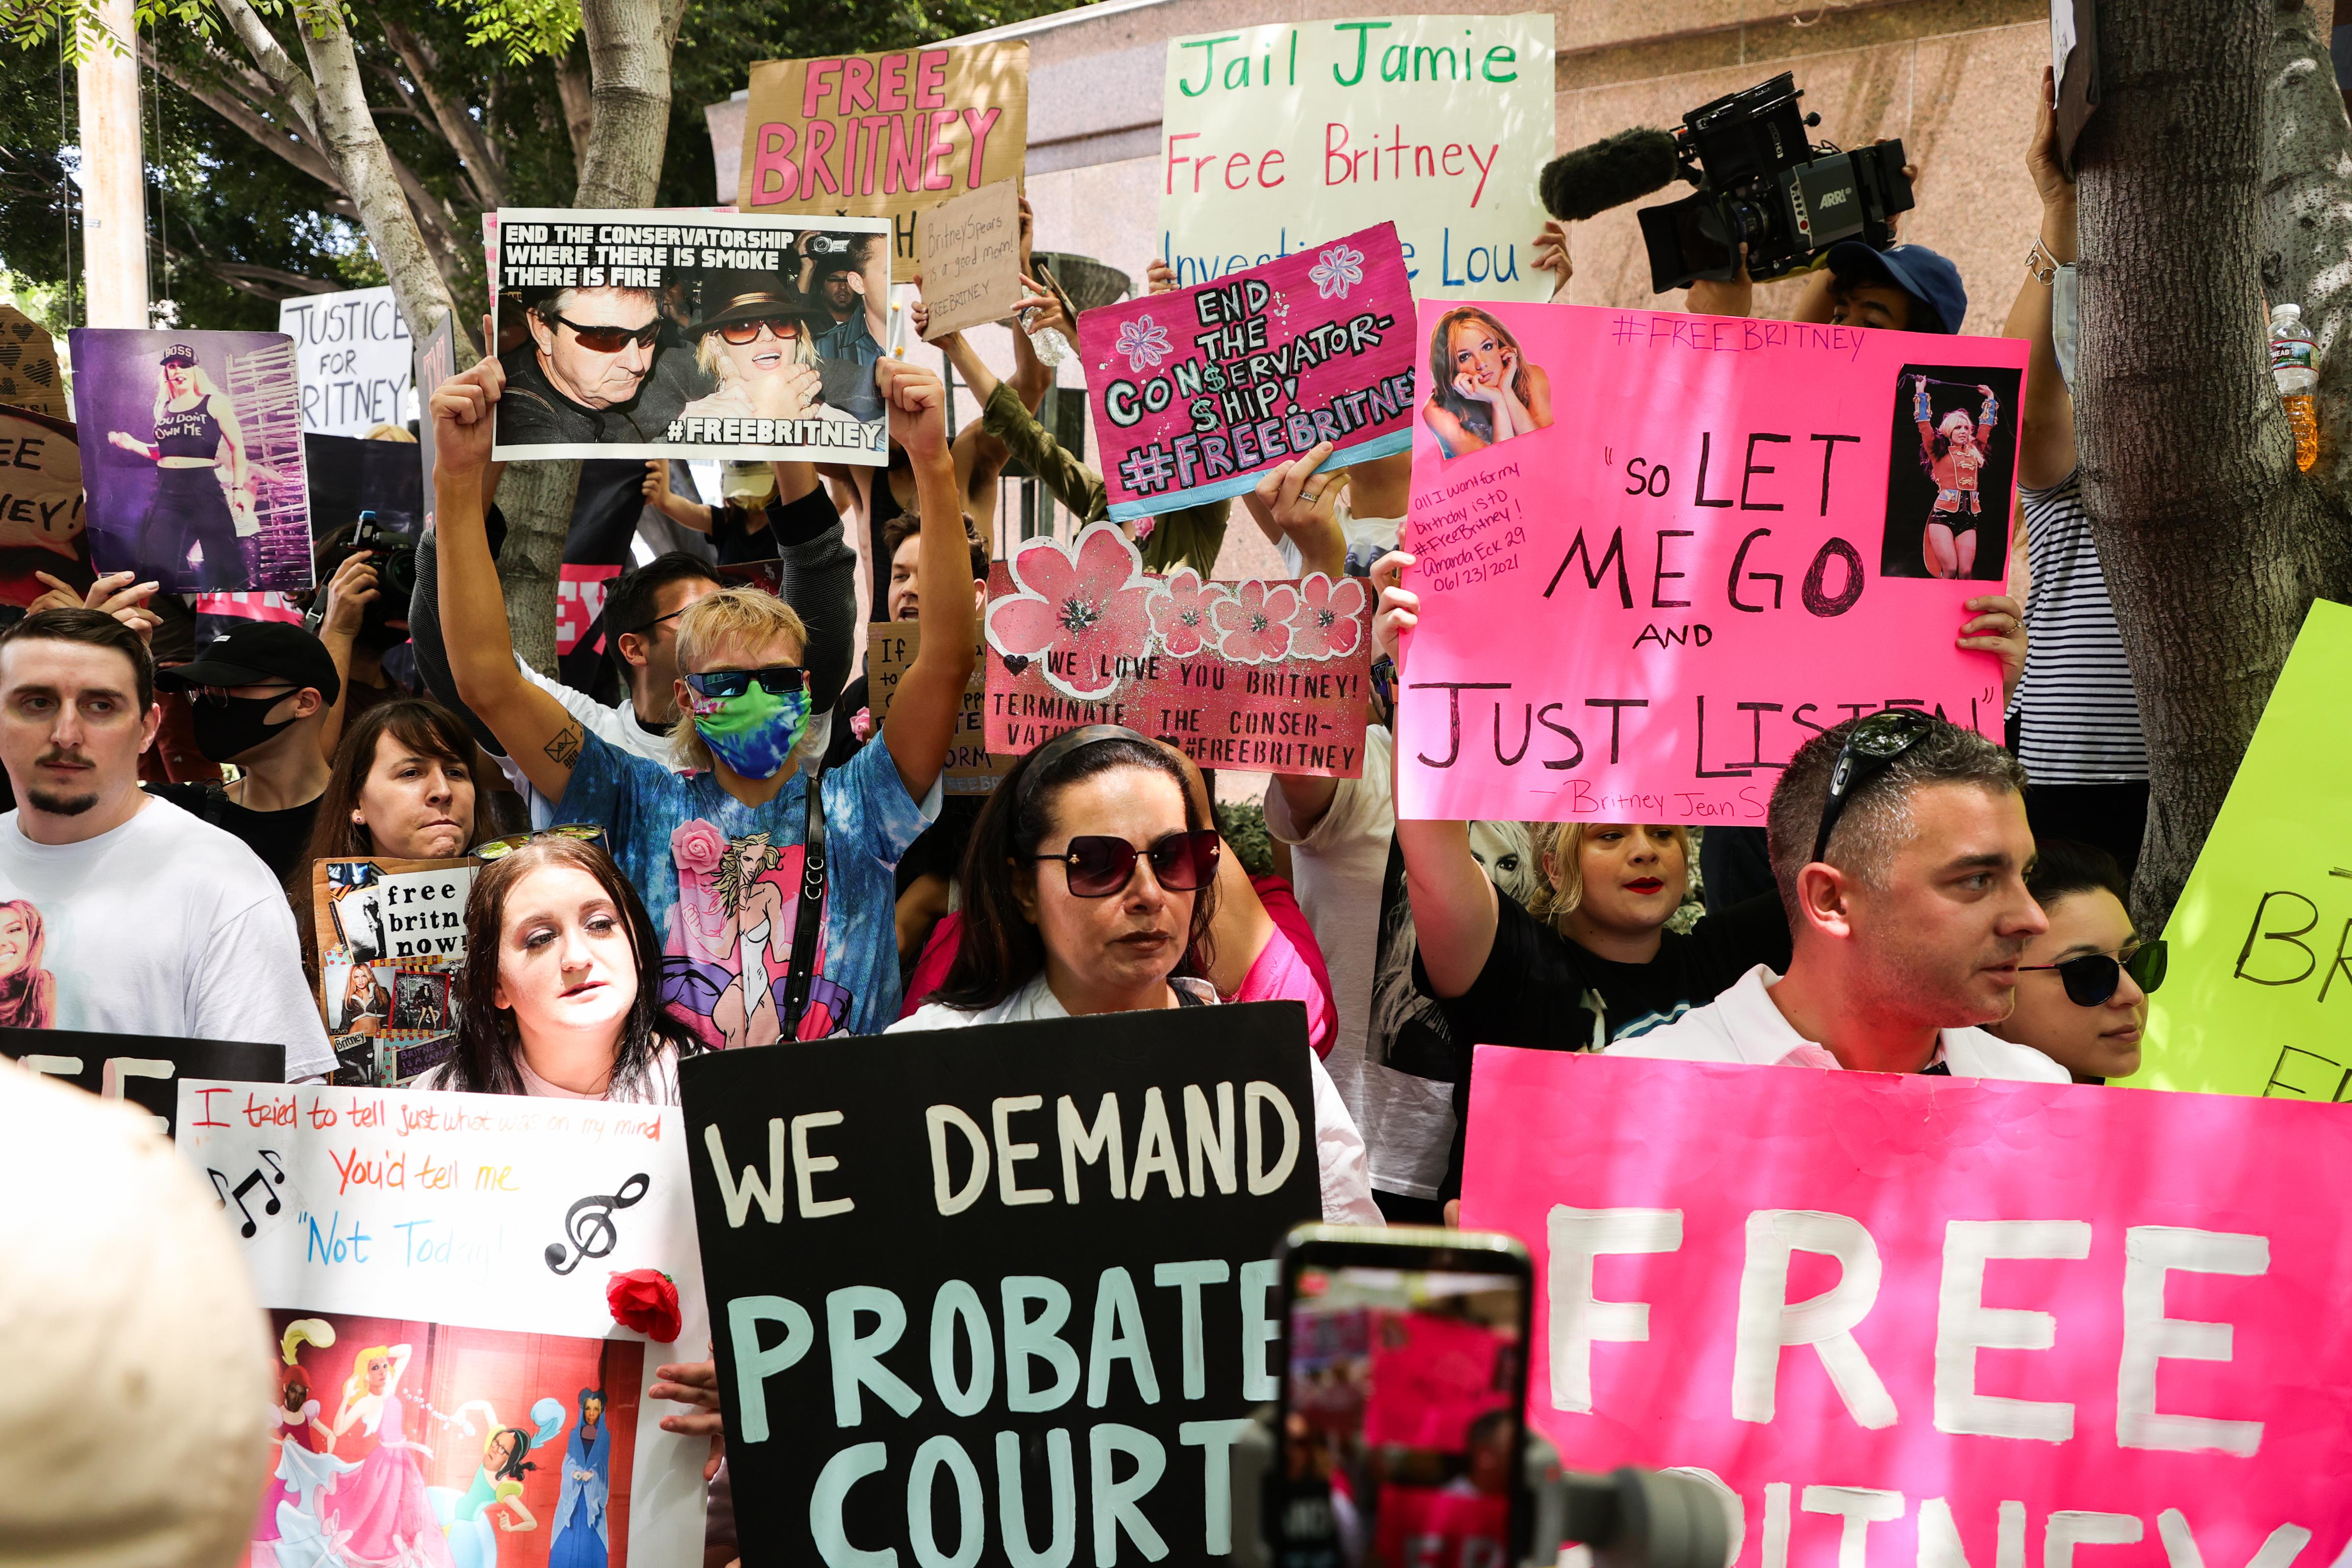 People in a crowd hold various signs, many of which are pink, calling for Britney's freedom from the conservatorship.